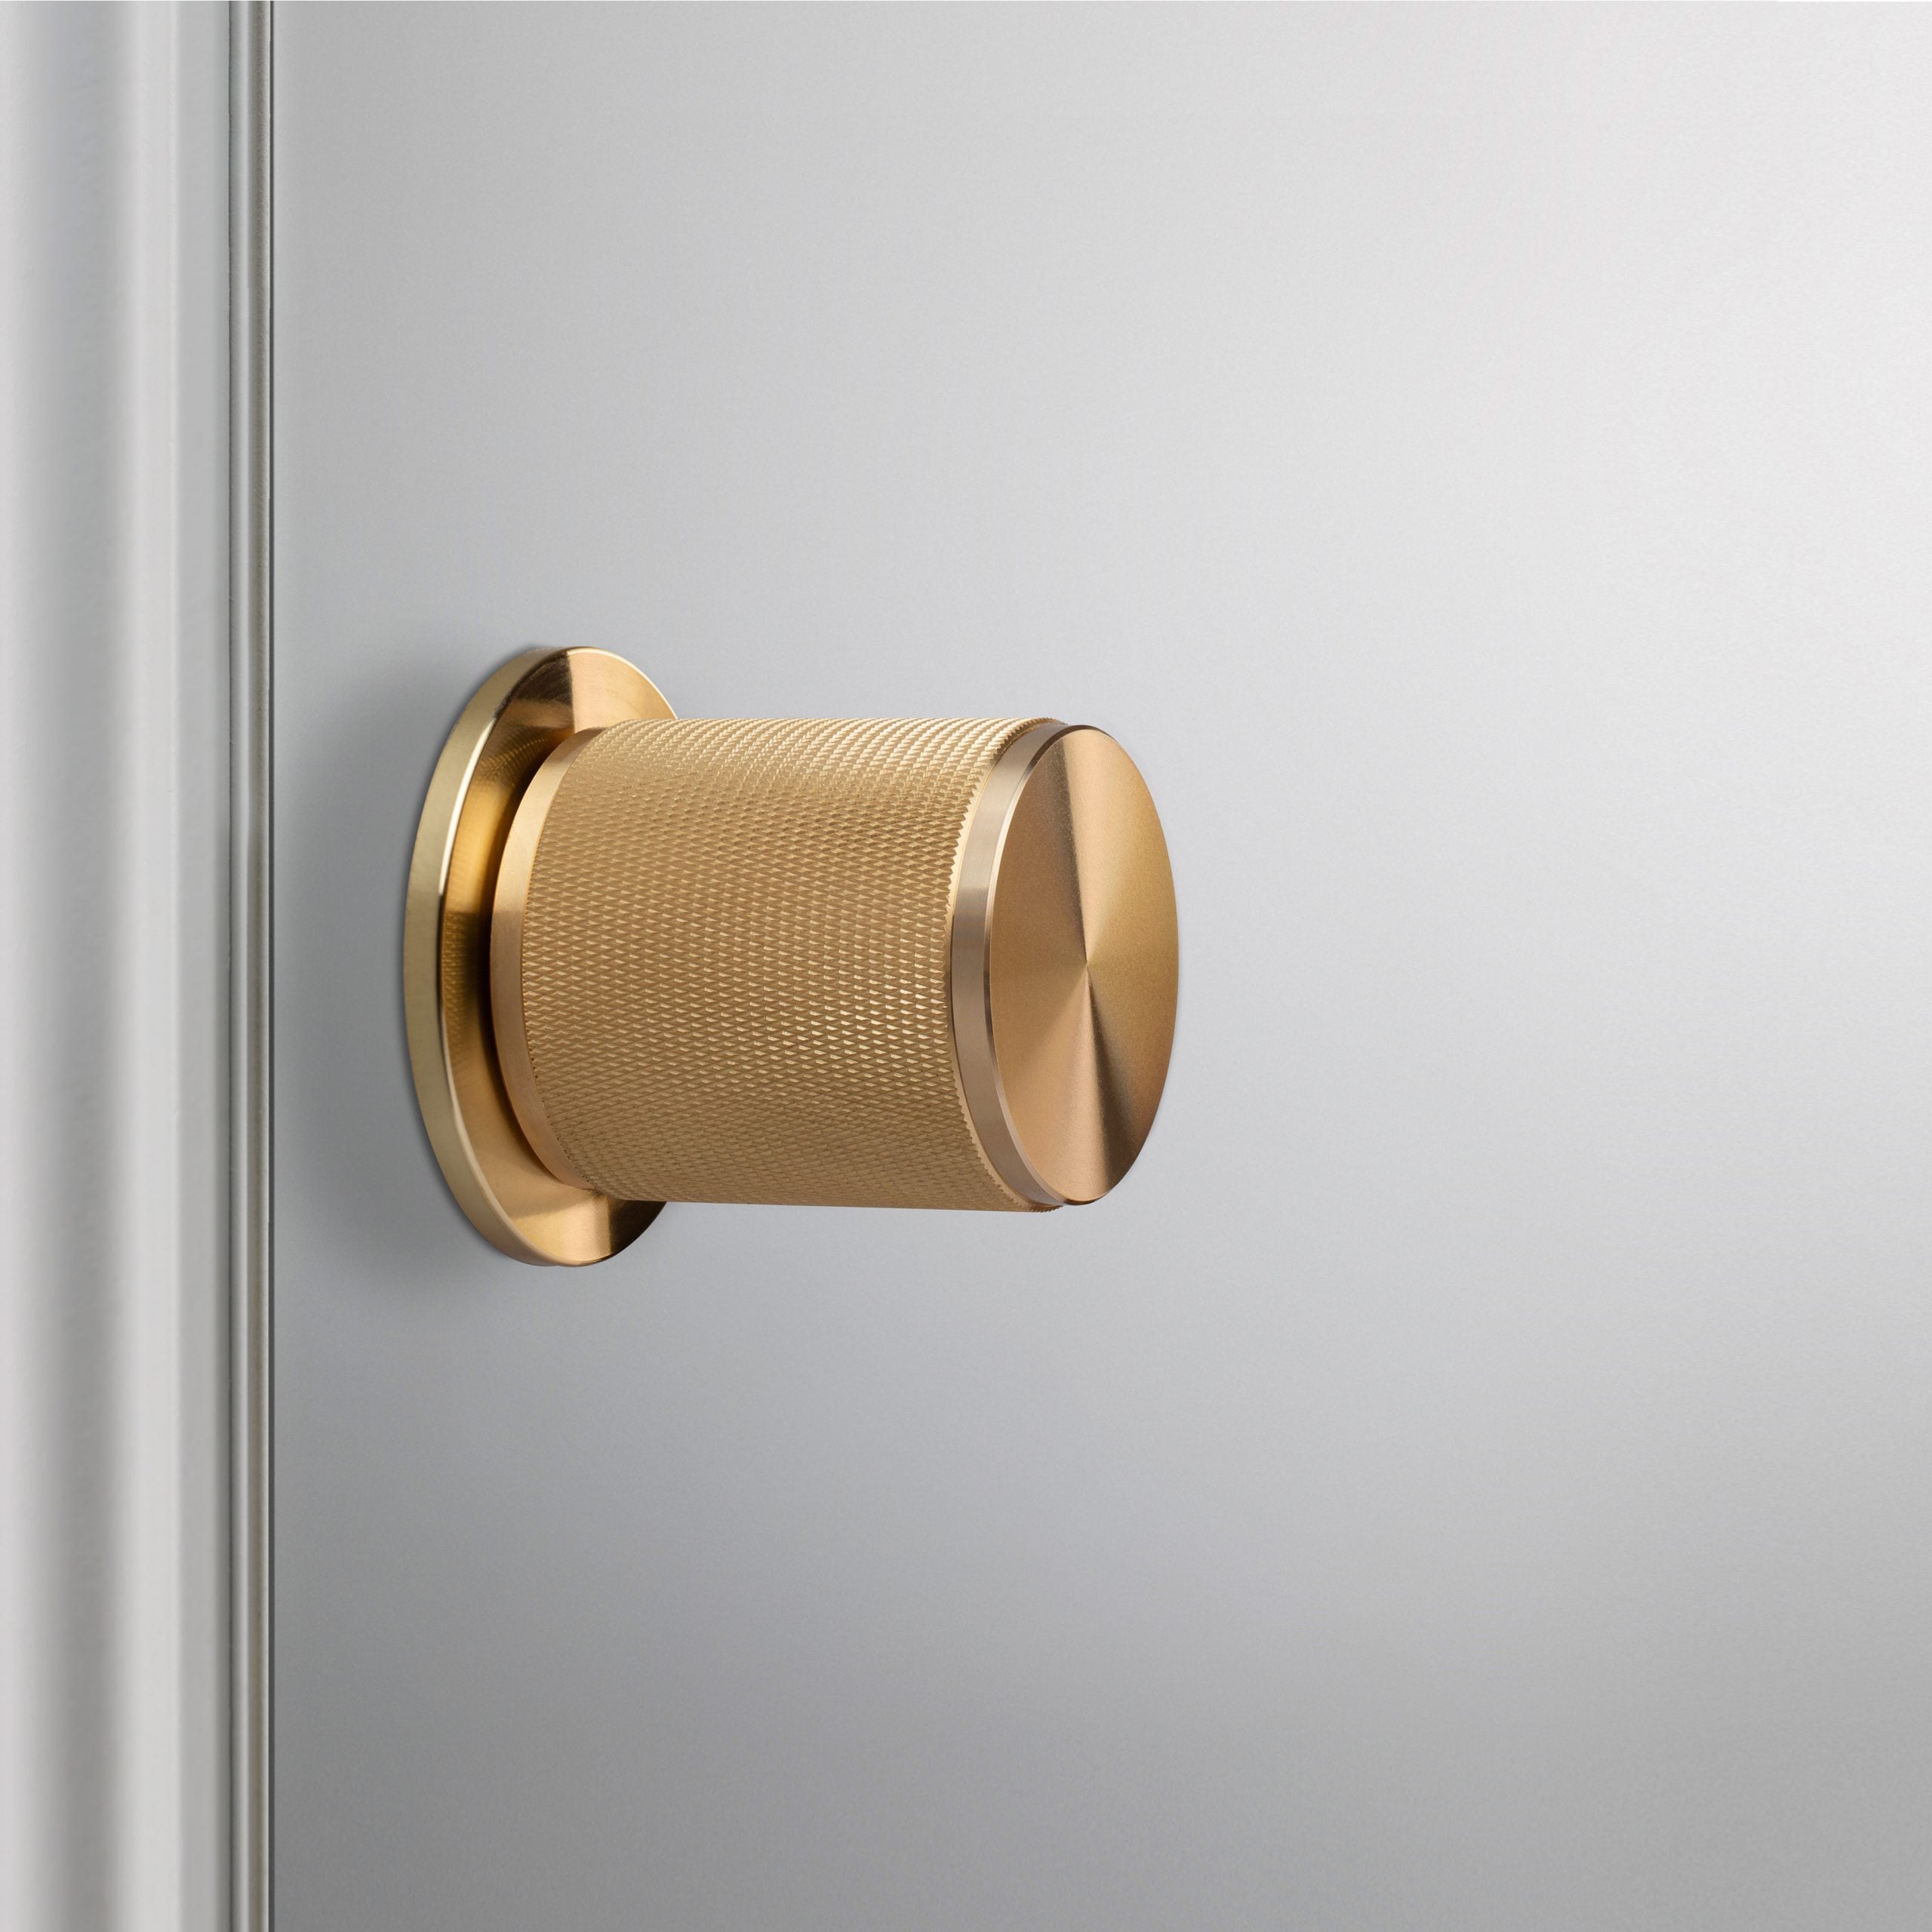 FIXED DOOR HANDLE / SINGLE-SIDED / LINEAR / BRASS - Buster + Punch